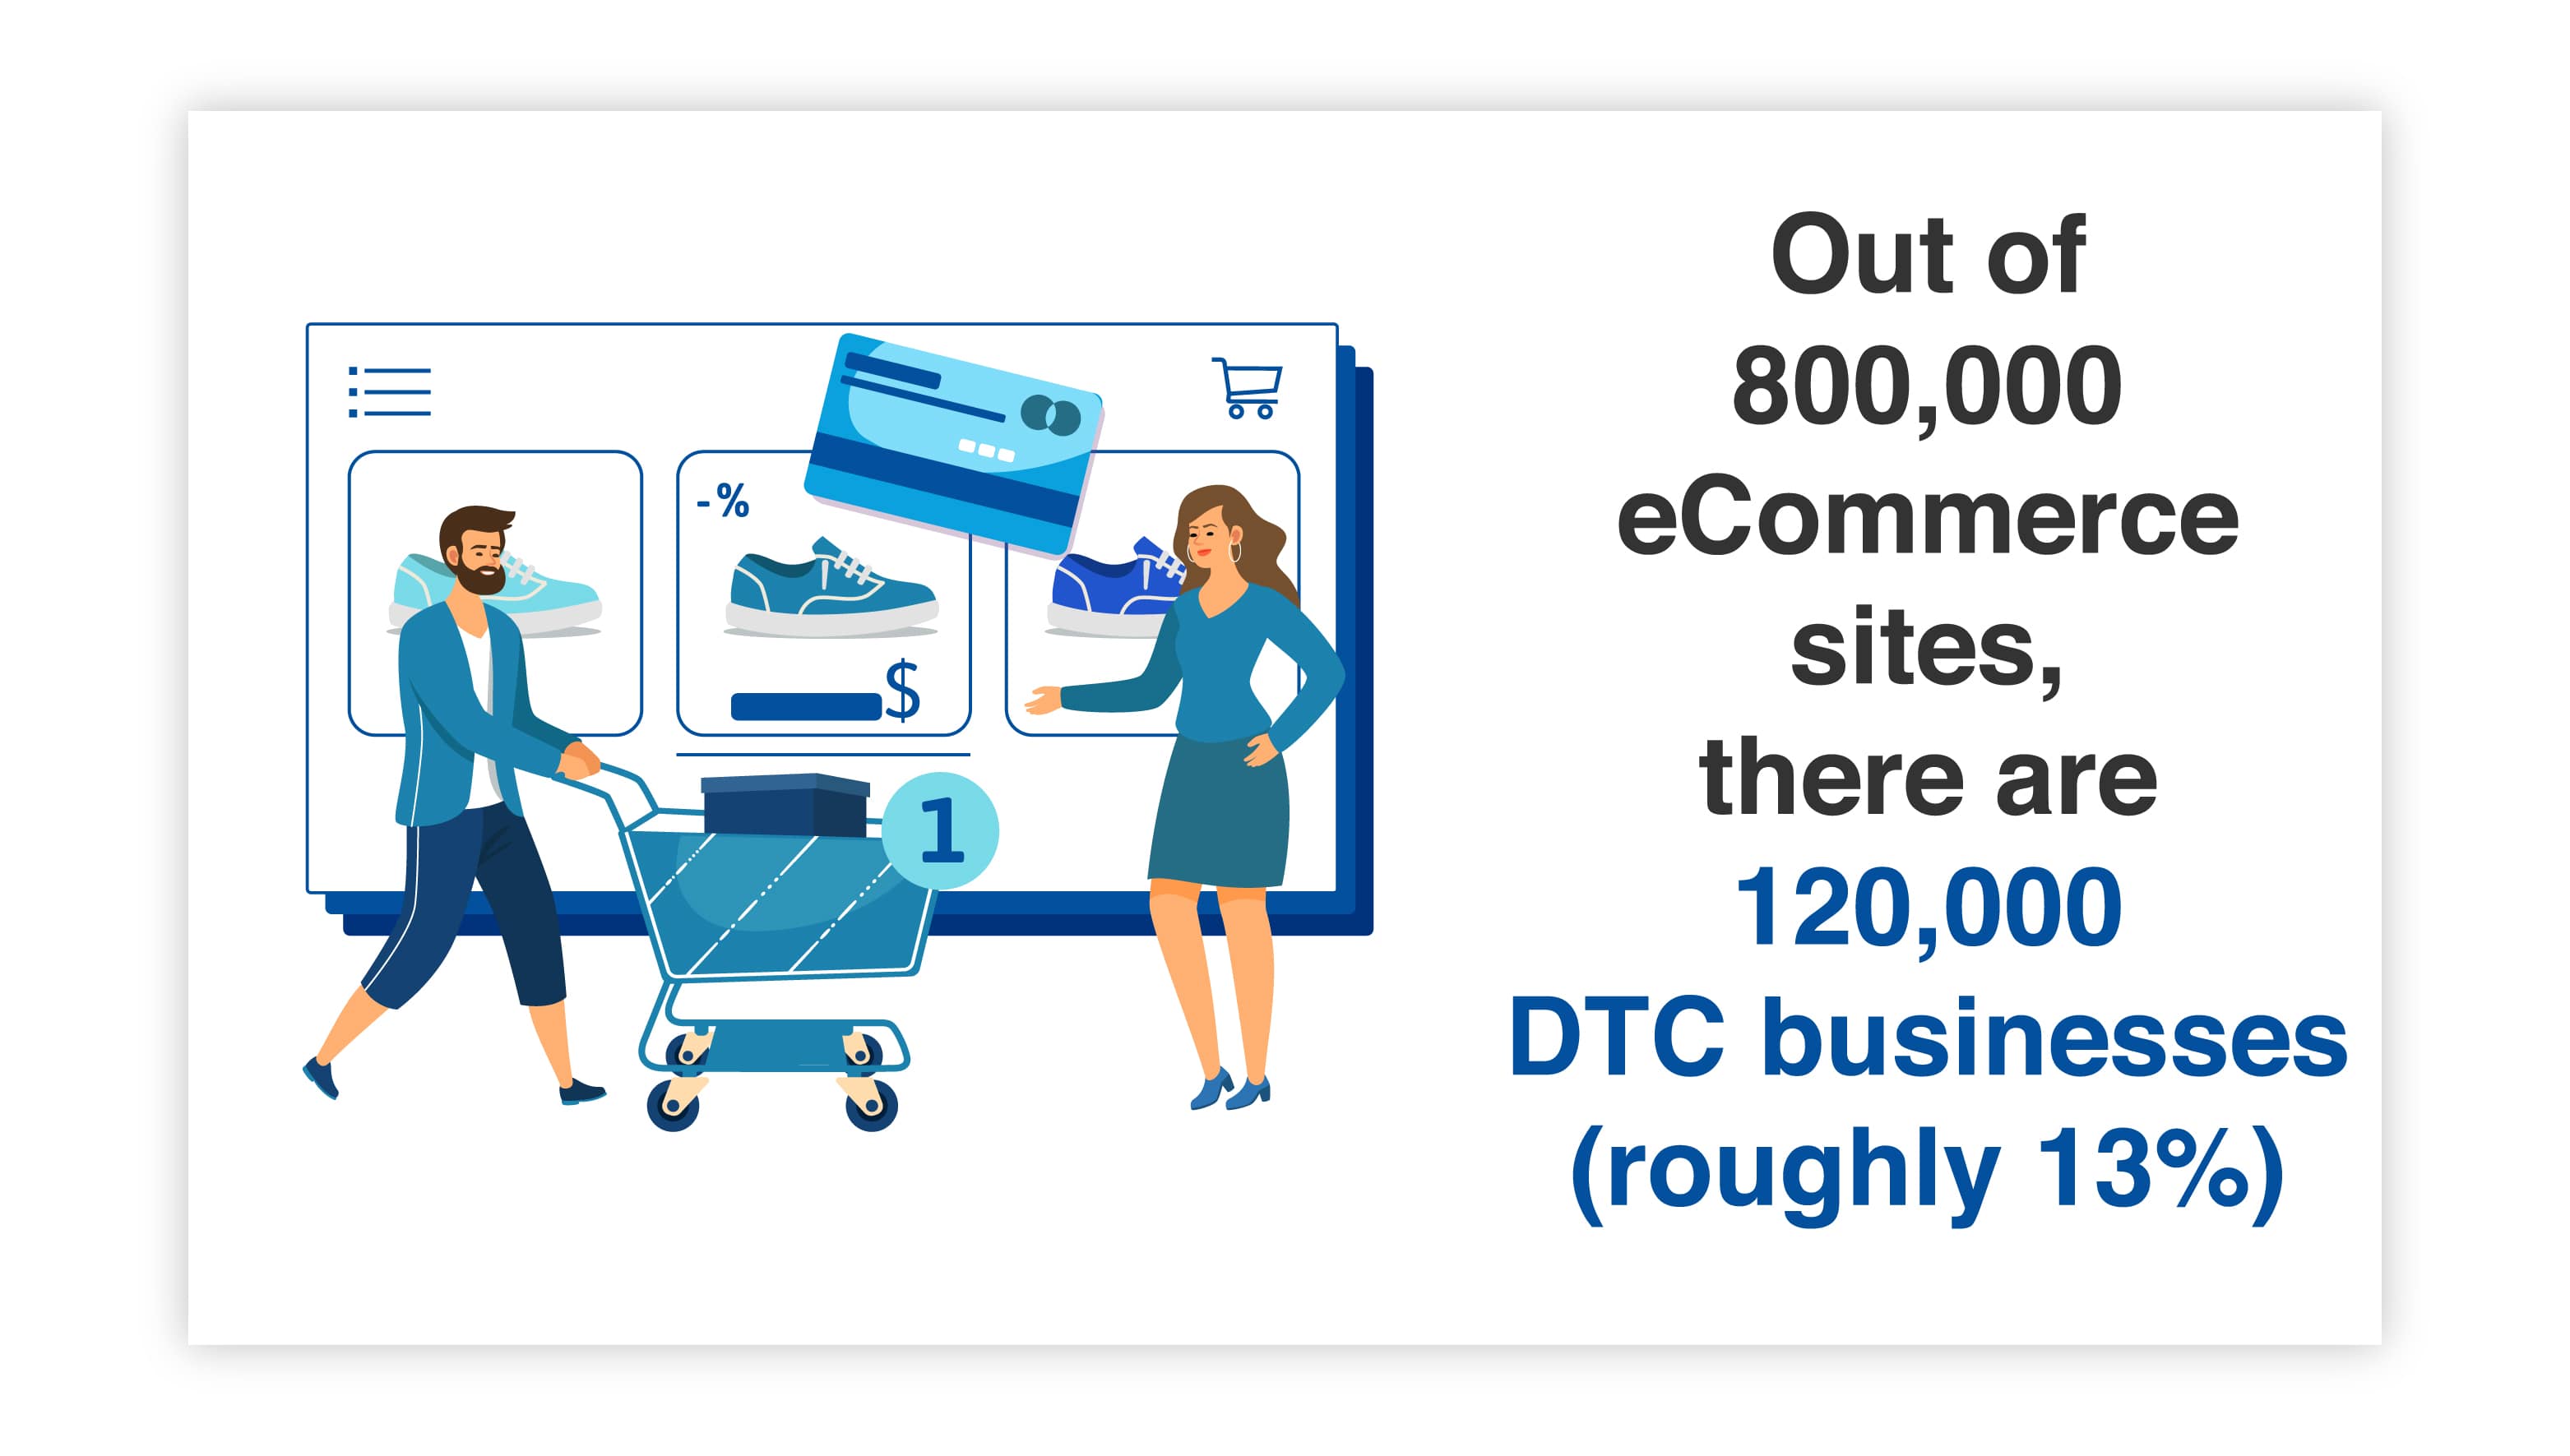 DTC businesses